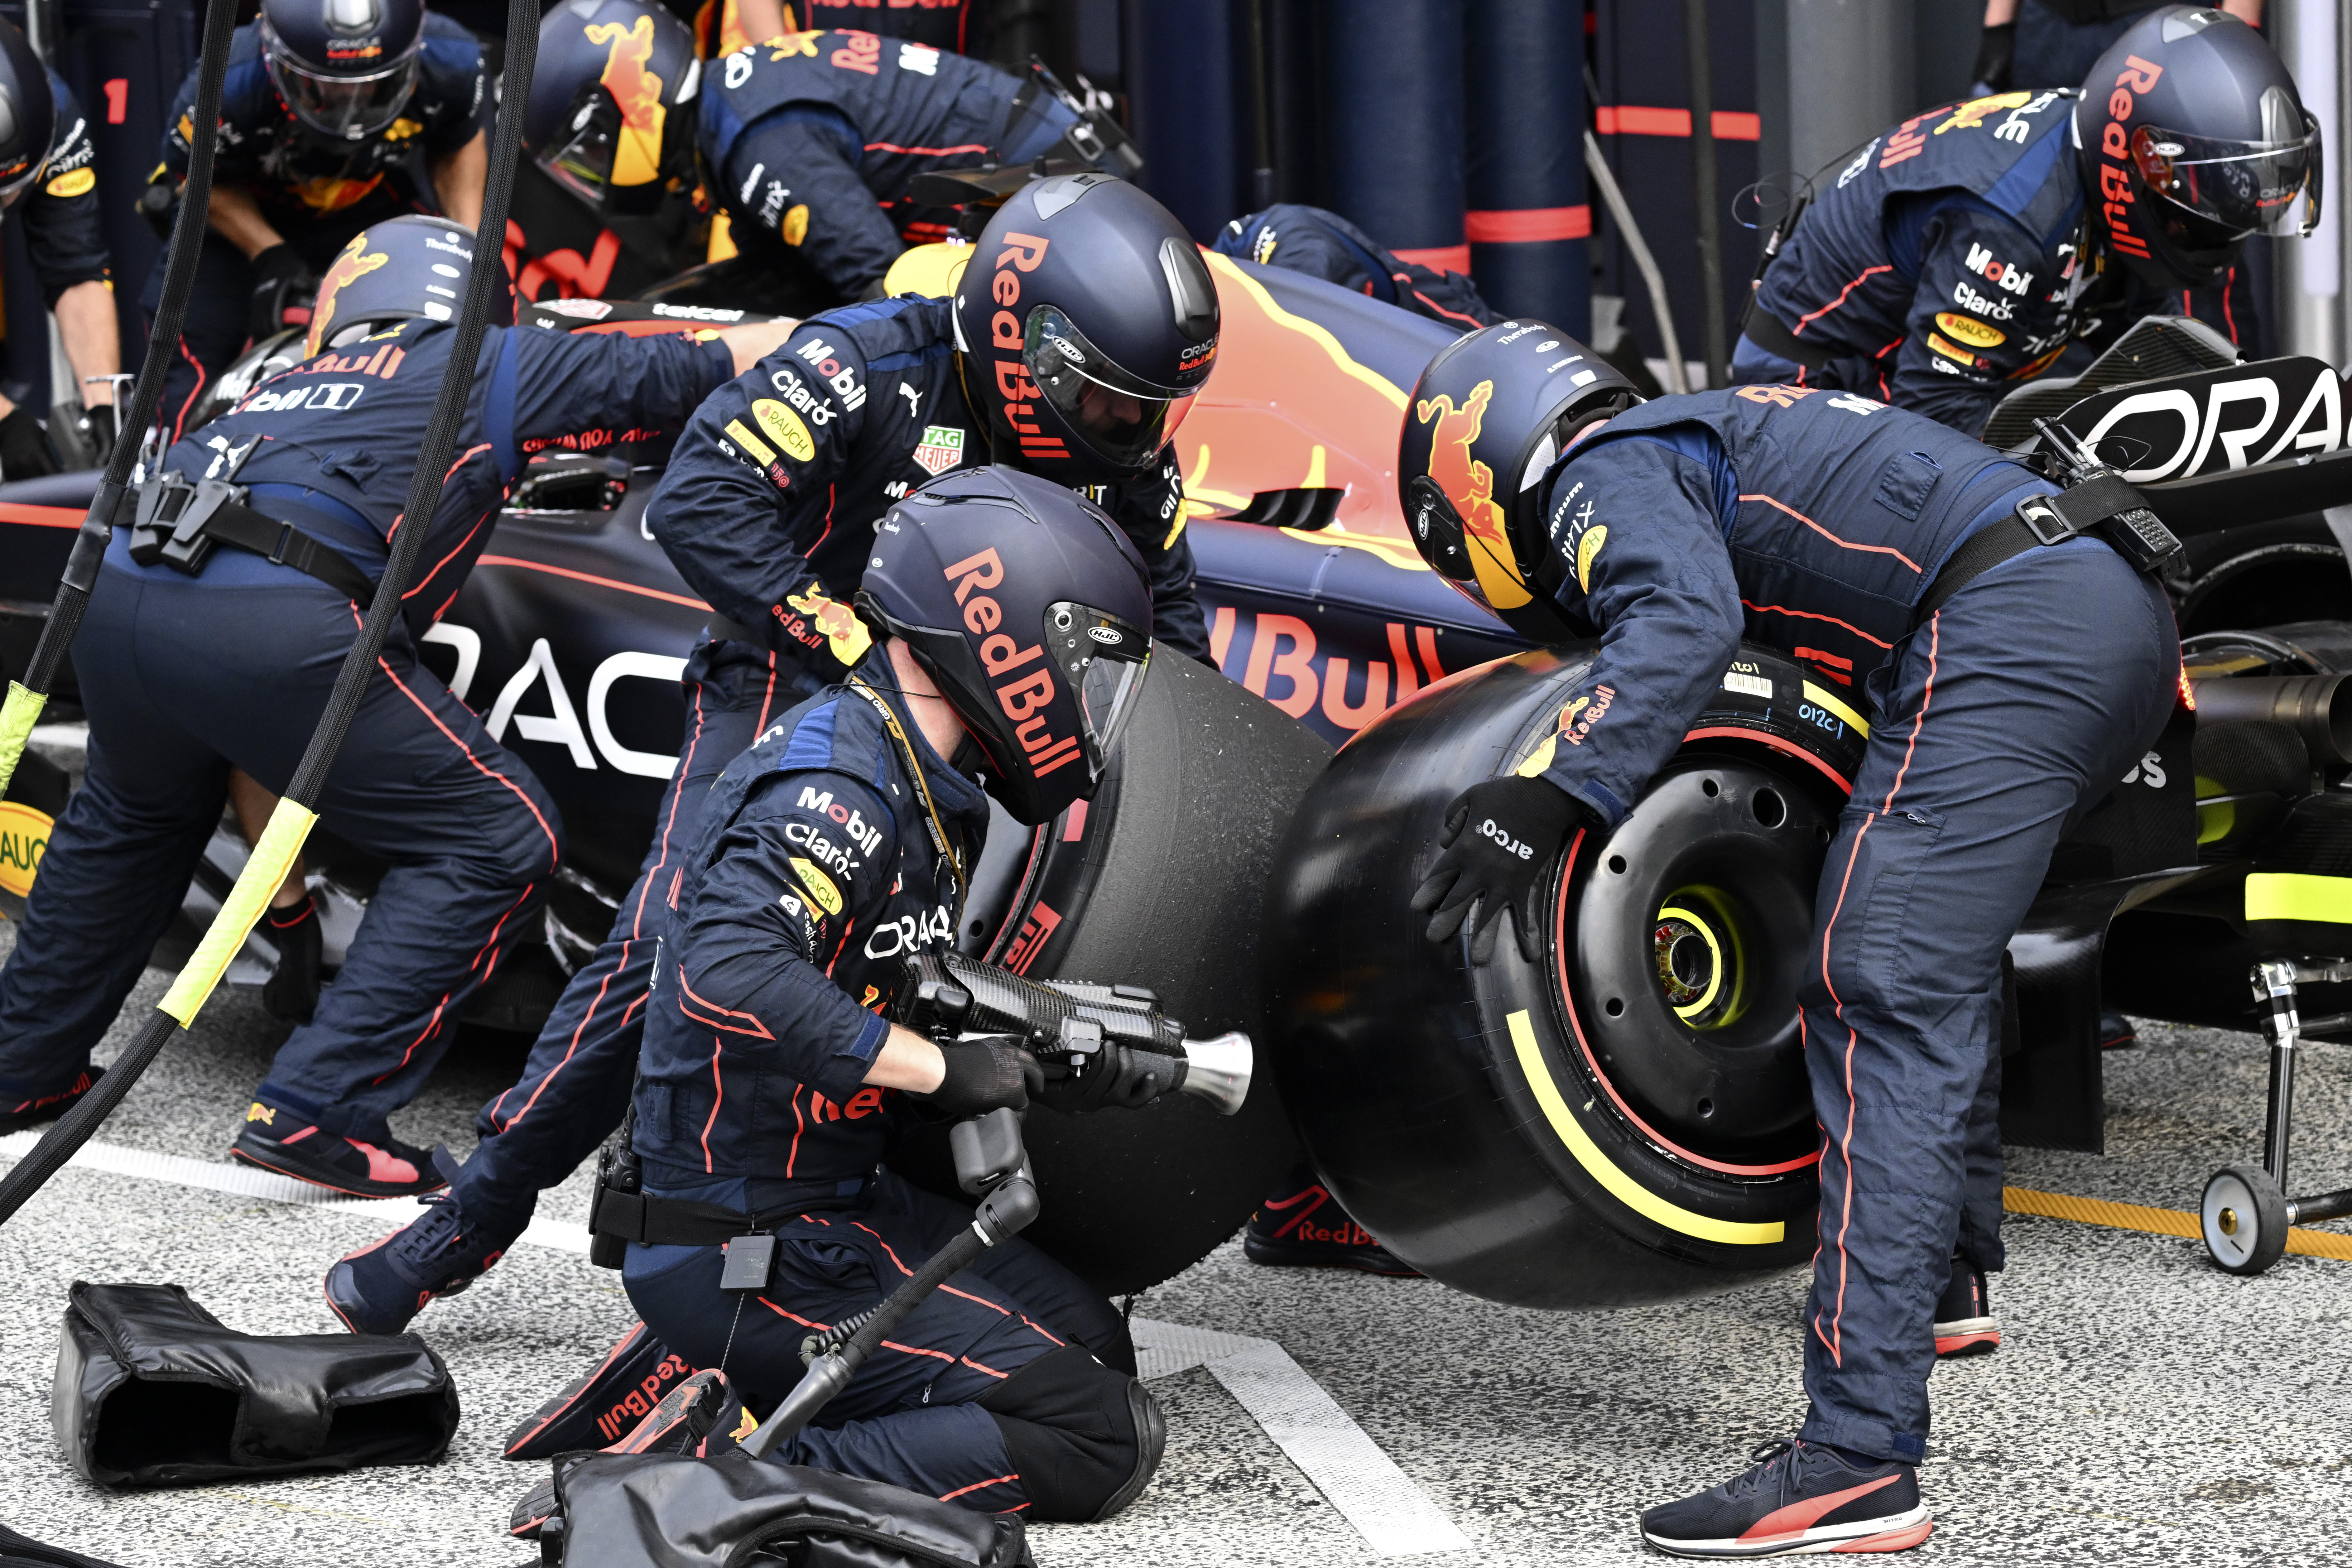 Red Bull mechanics work on the car of driver Max Verstappen of the Netherlands during the Formula One Dutch Grand Prix auto race, at the Zandvoort racetrack, in Zandvoort, Netherlands, Sunday, Sept. 4, 2022. (Christian Bruna/Pool via AP)